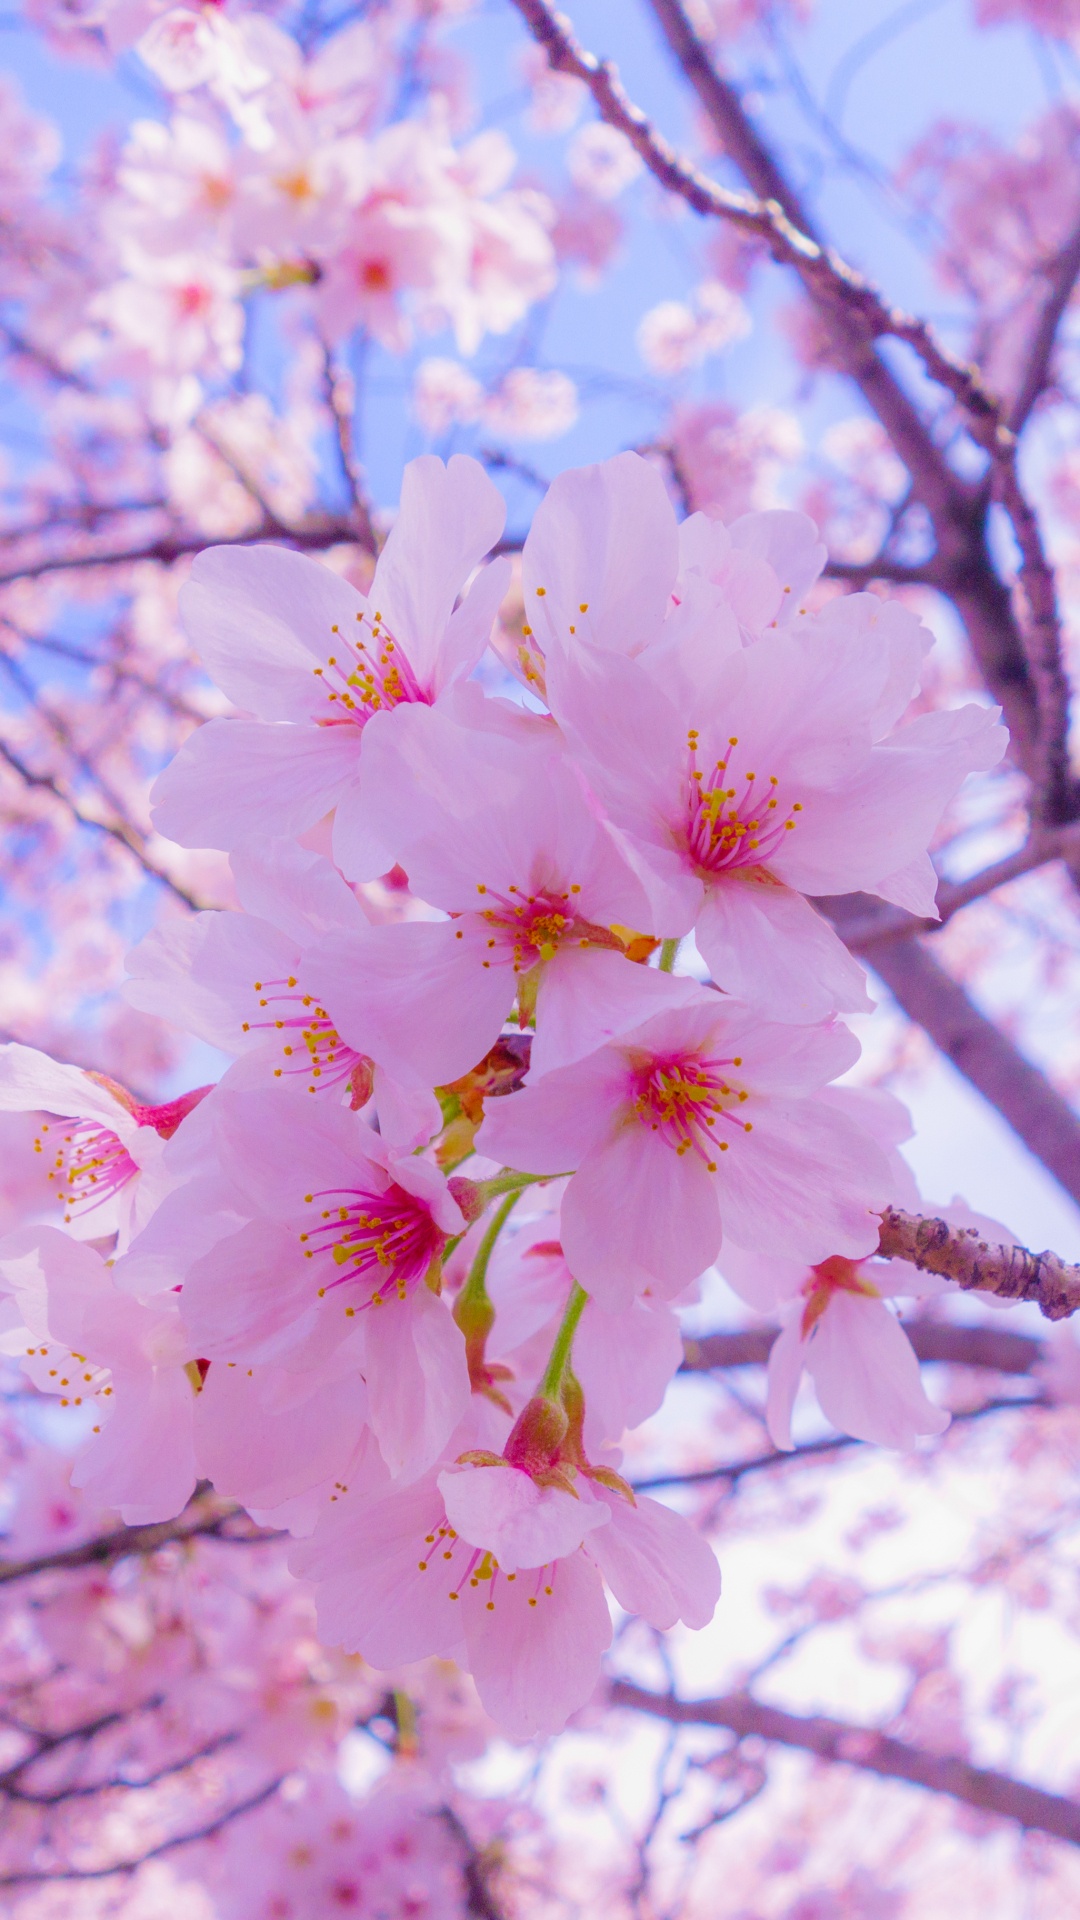 Pink Cherry Blossom Tree During Daytime. Wallpaper in 1080x1920 Resolution